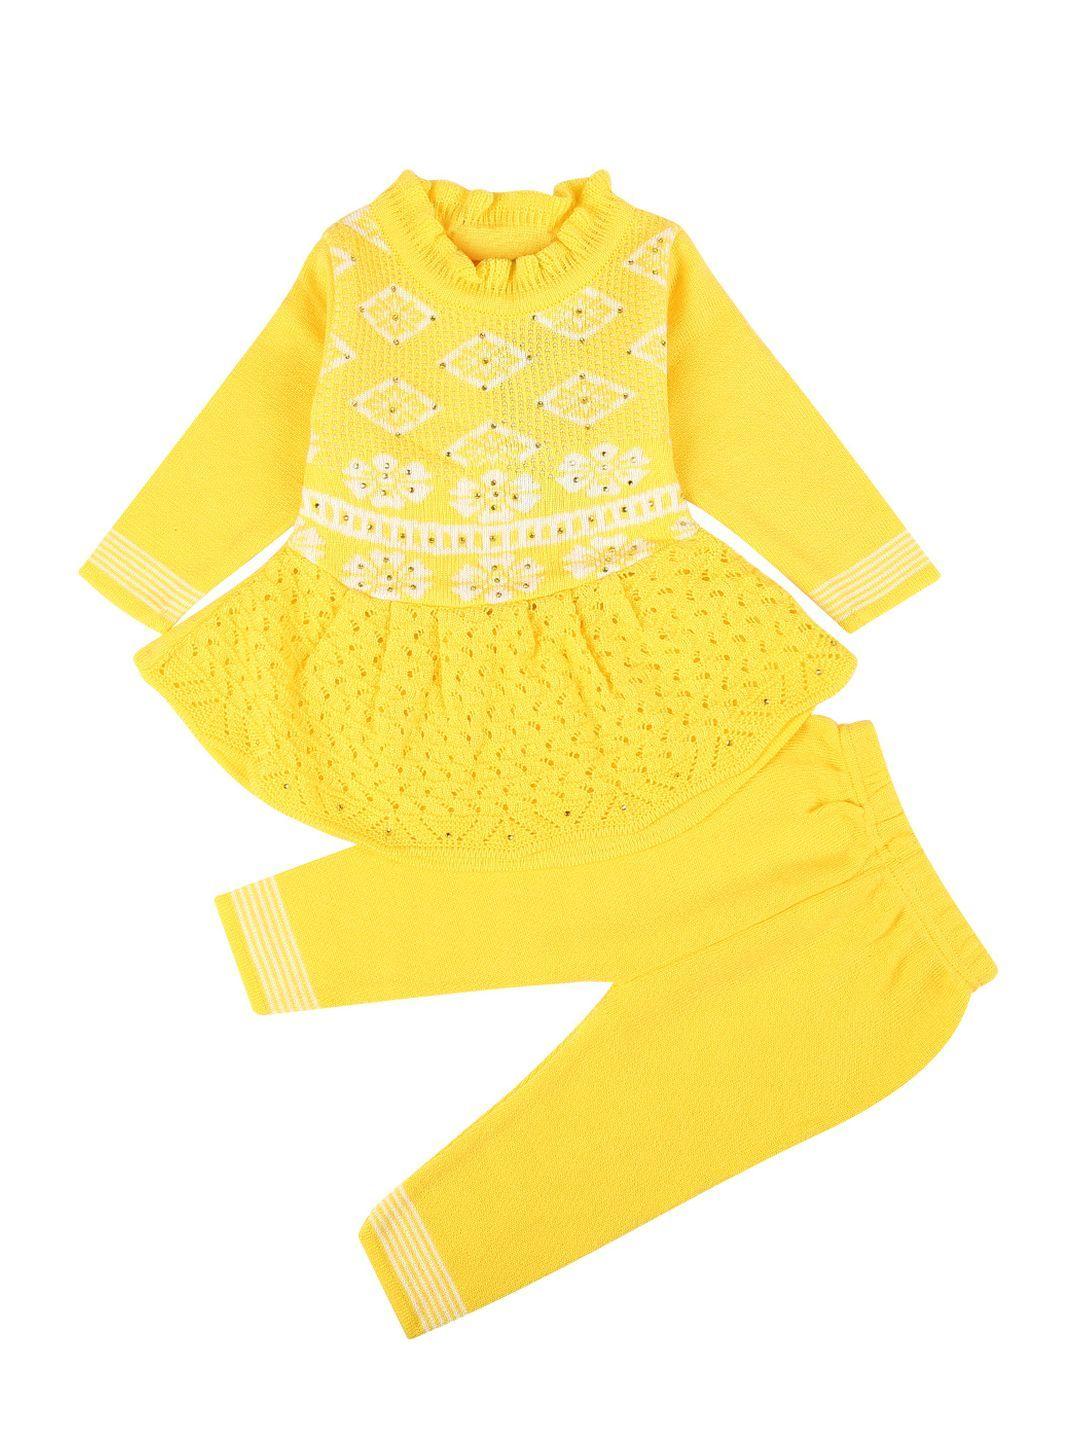 v-mart unisex kids yellow & white self design top with trousers